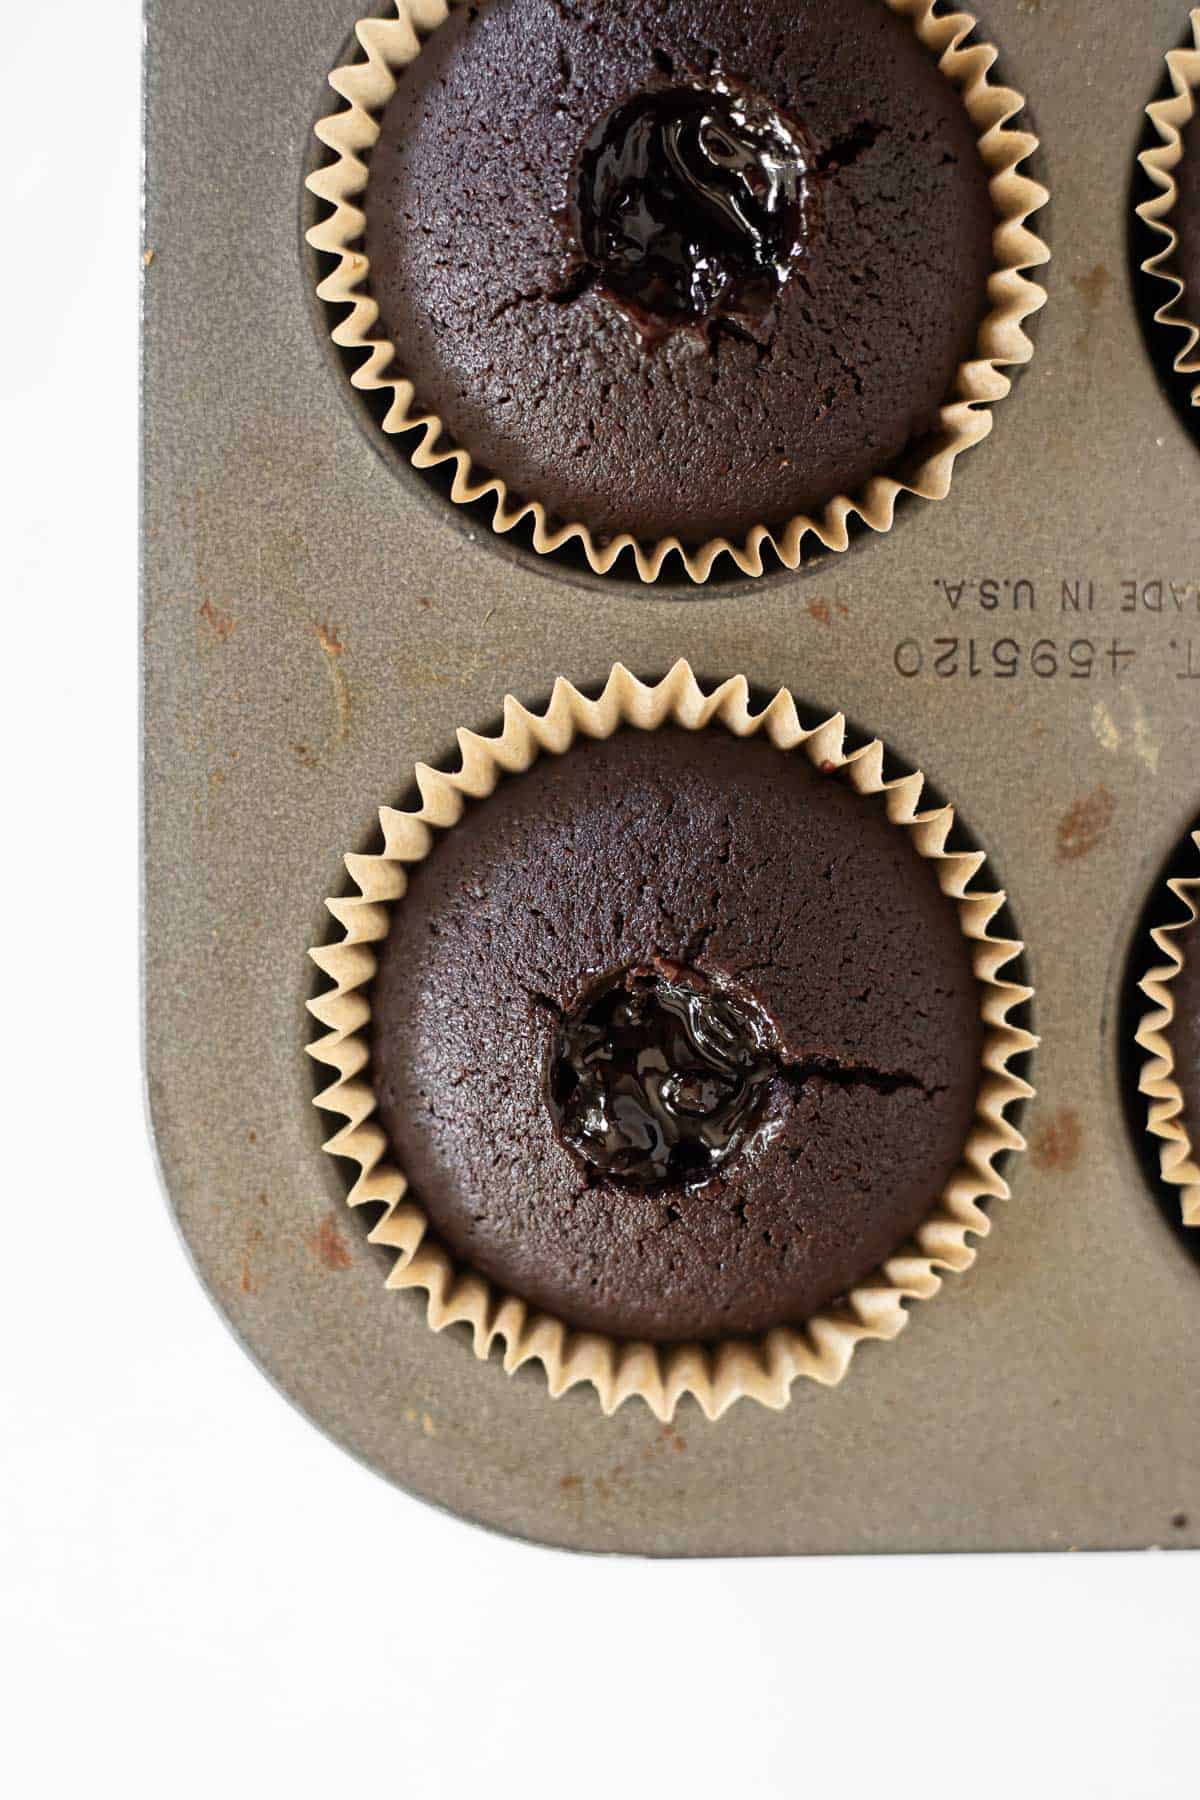 baked chocolate cupcakes cored and filled with blackberry jam.